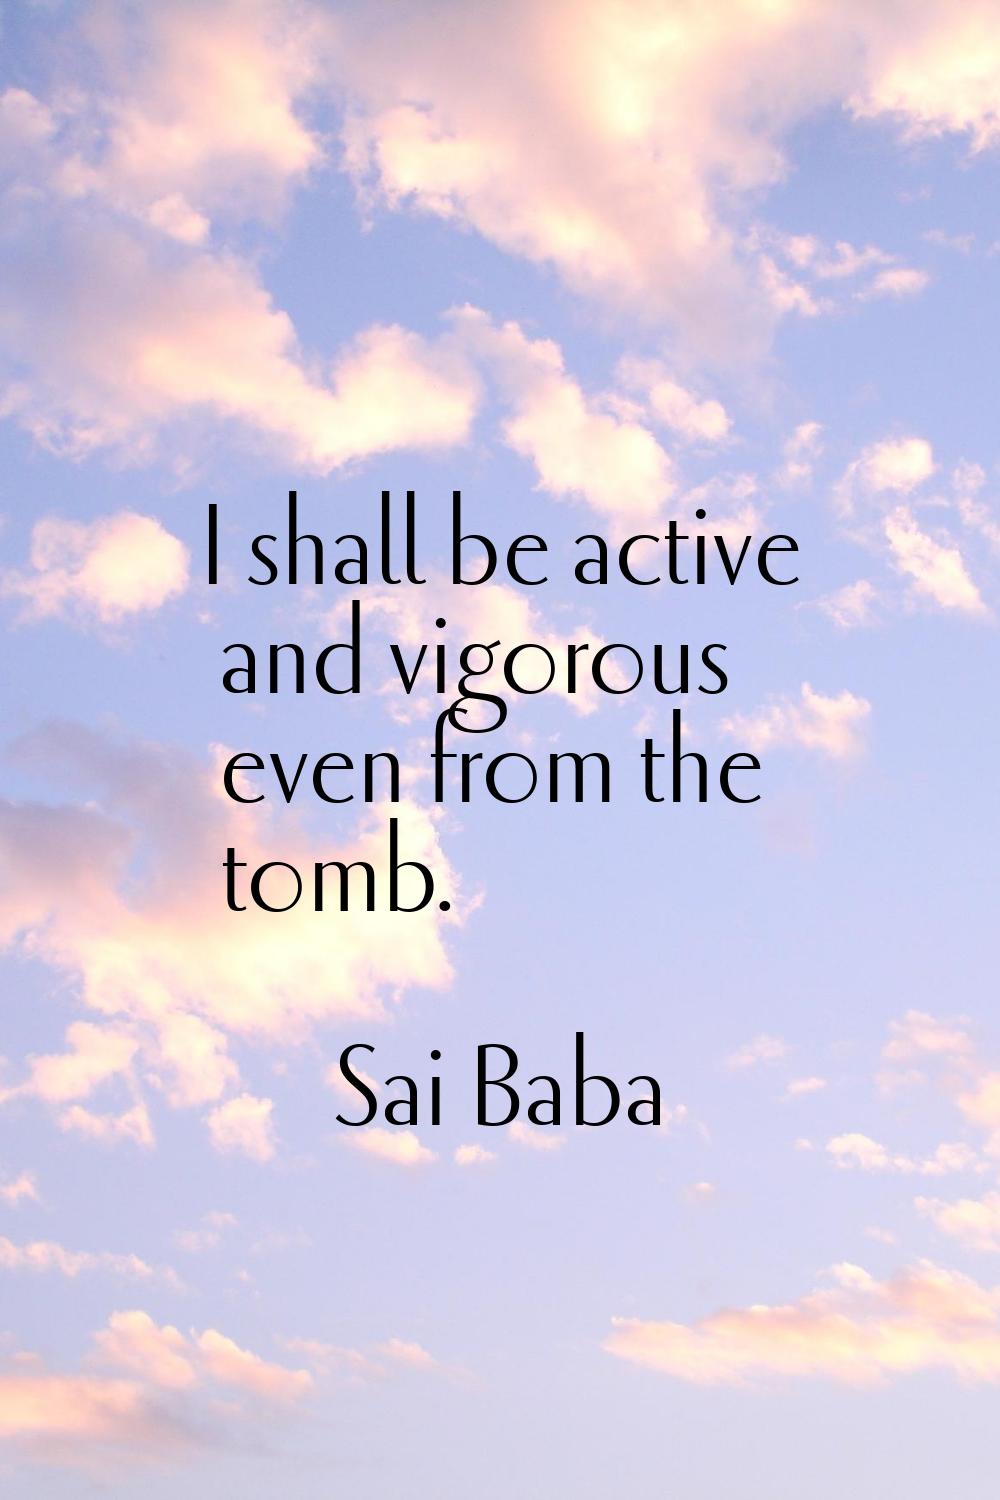 I shall be active and vigorous even from the tomb.